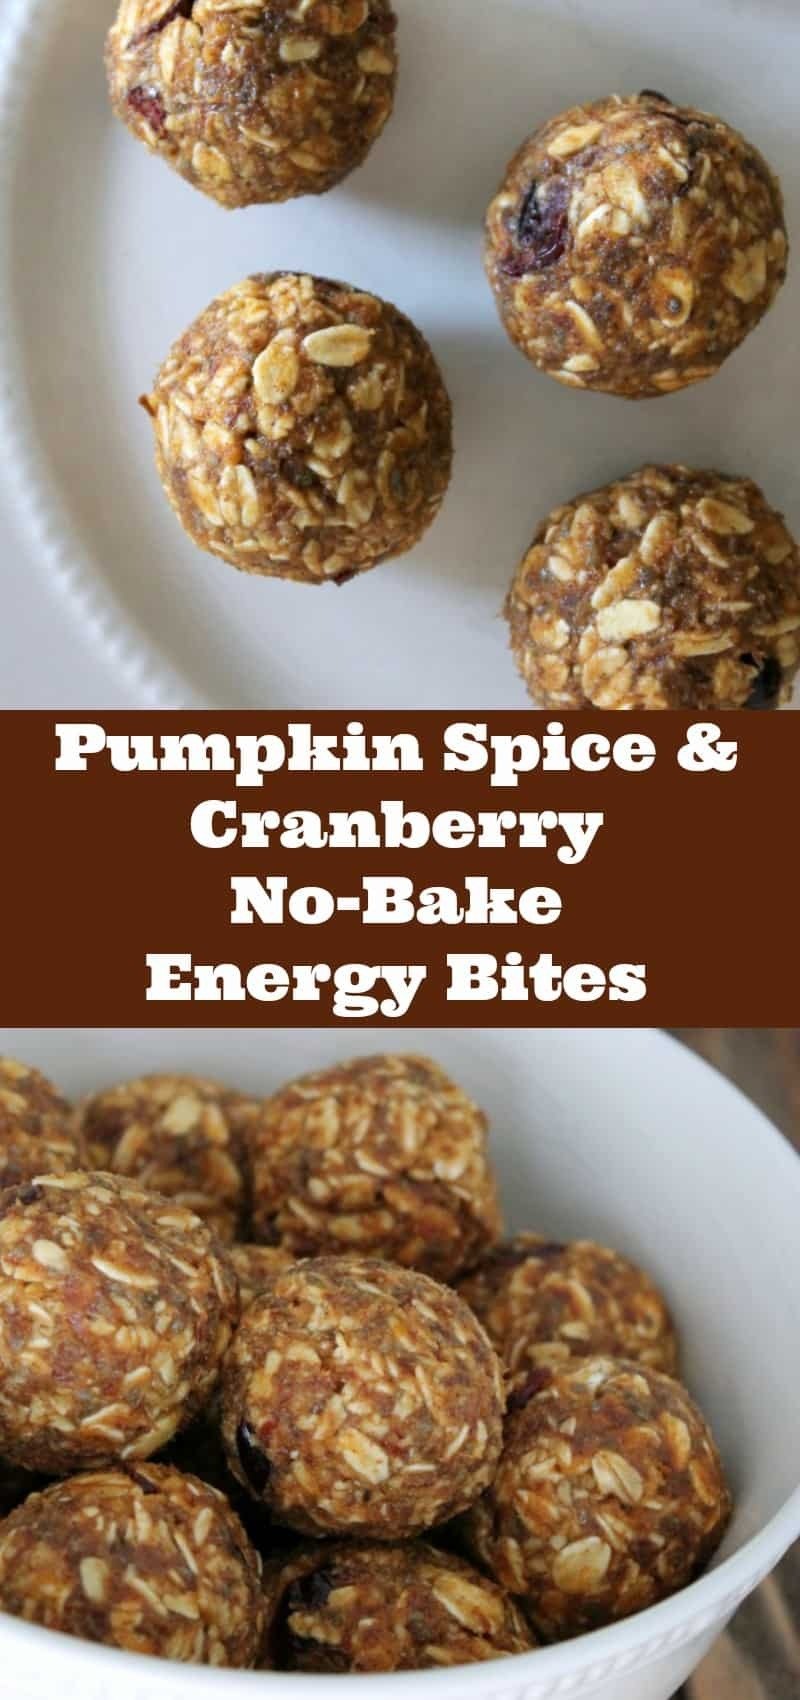 Pumpkin Spice and Cranberry Energy Bites